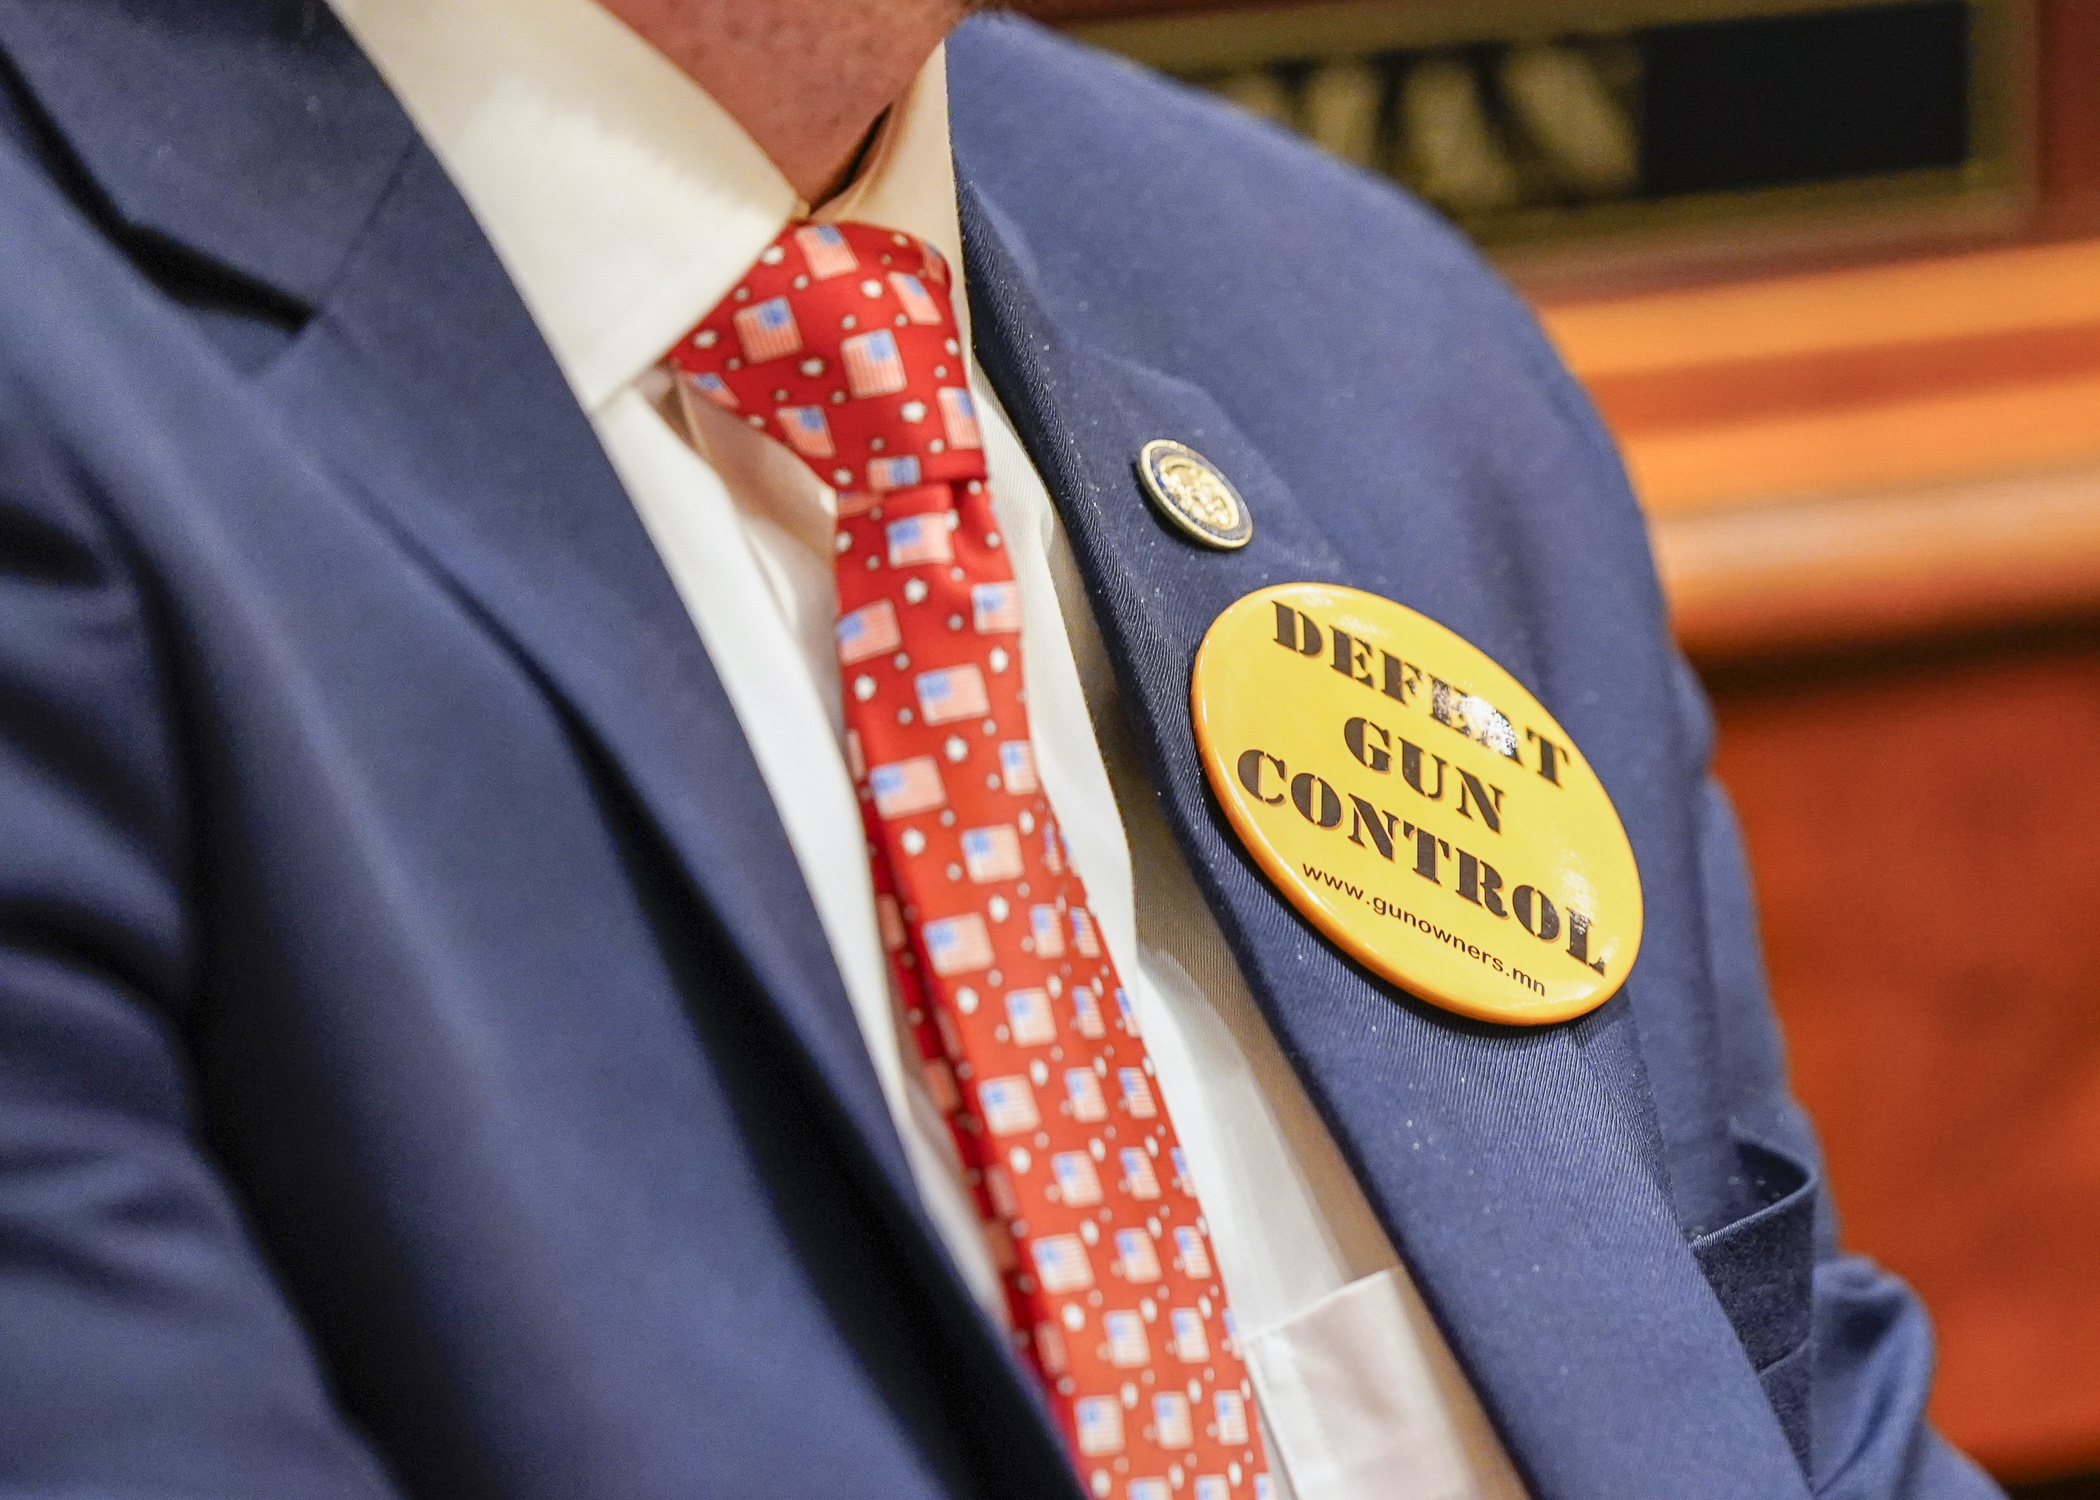 Rep. Isaac Schultz wears an anti-gun control button during debate on the omnibus judiciary and public safety finance and policy bill April 26. (Photo by Catherine Davis)